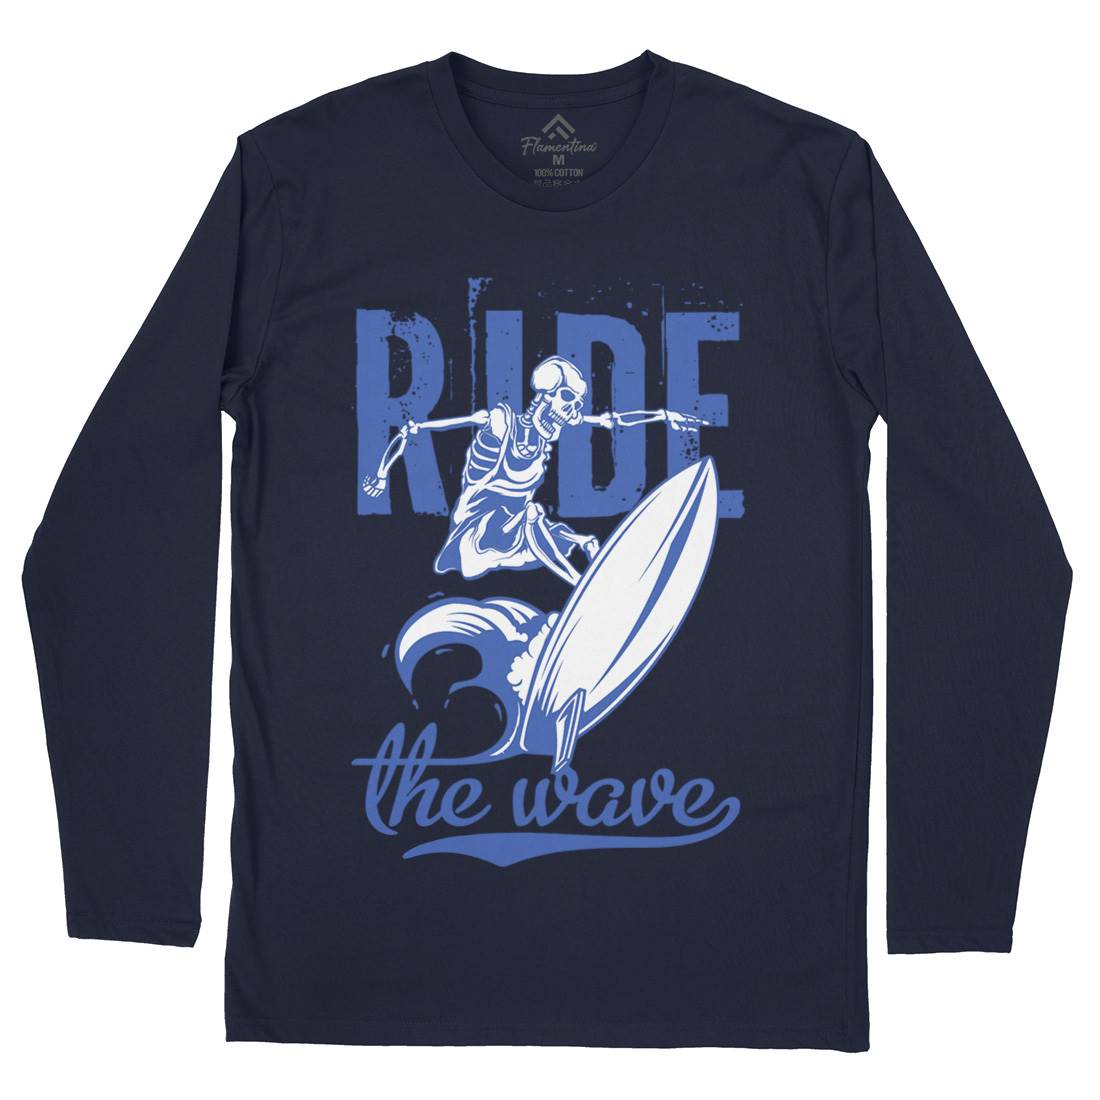 Ride Wave Surfing Mens Long Sleeve T-Shirt Surf B173